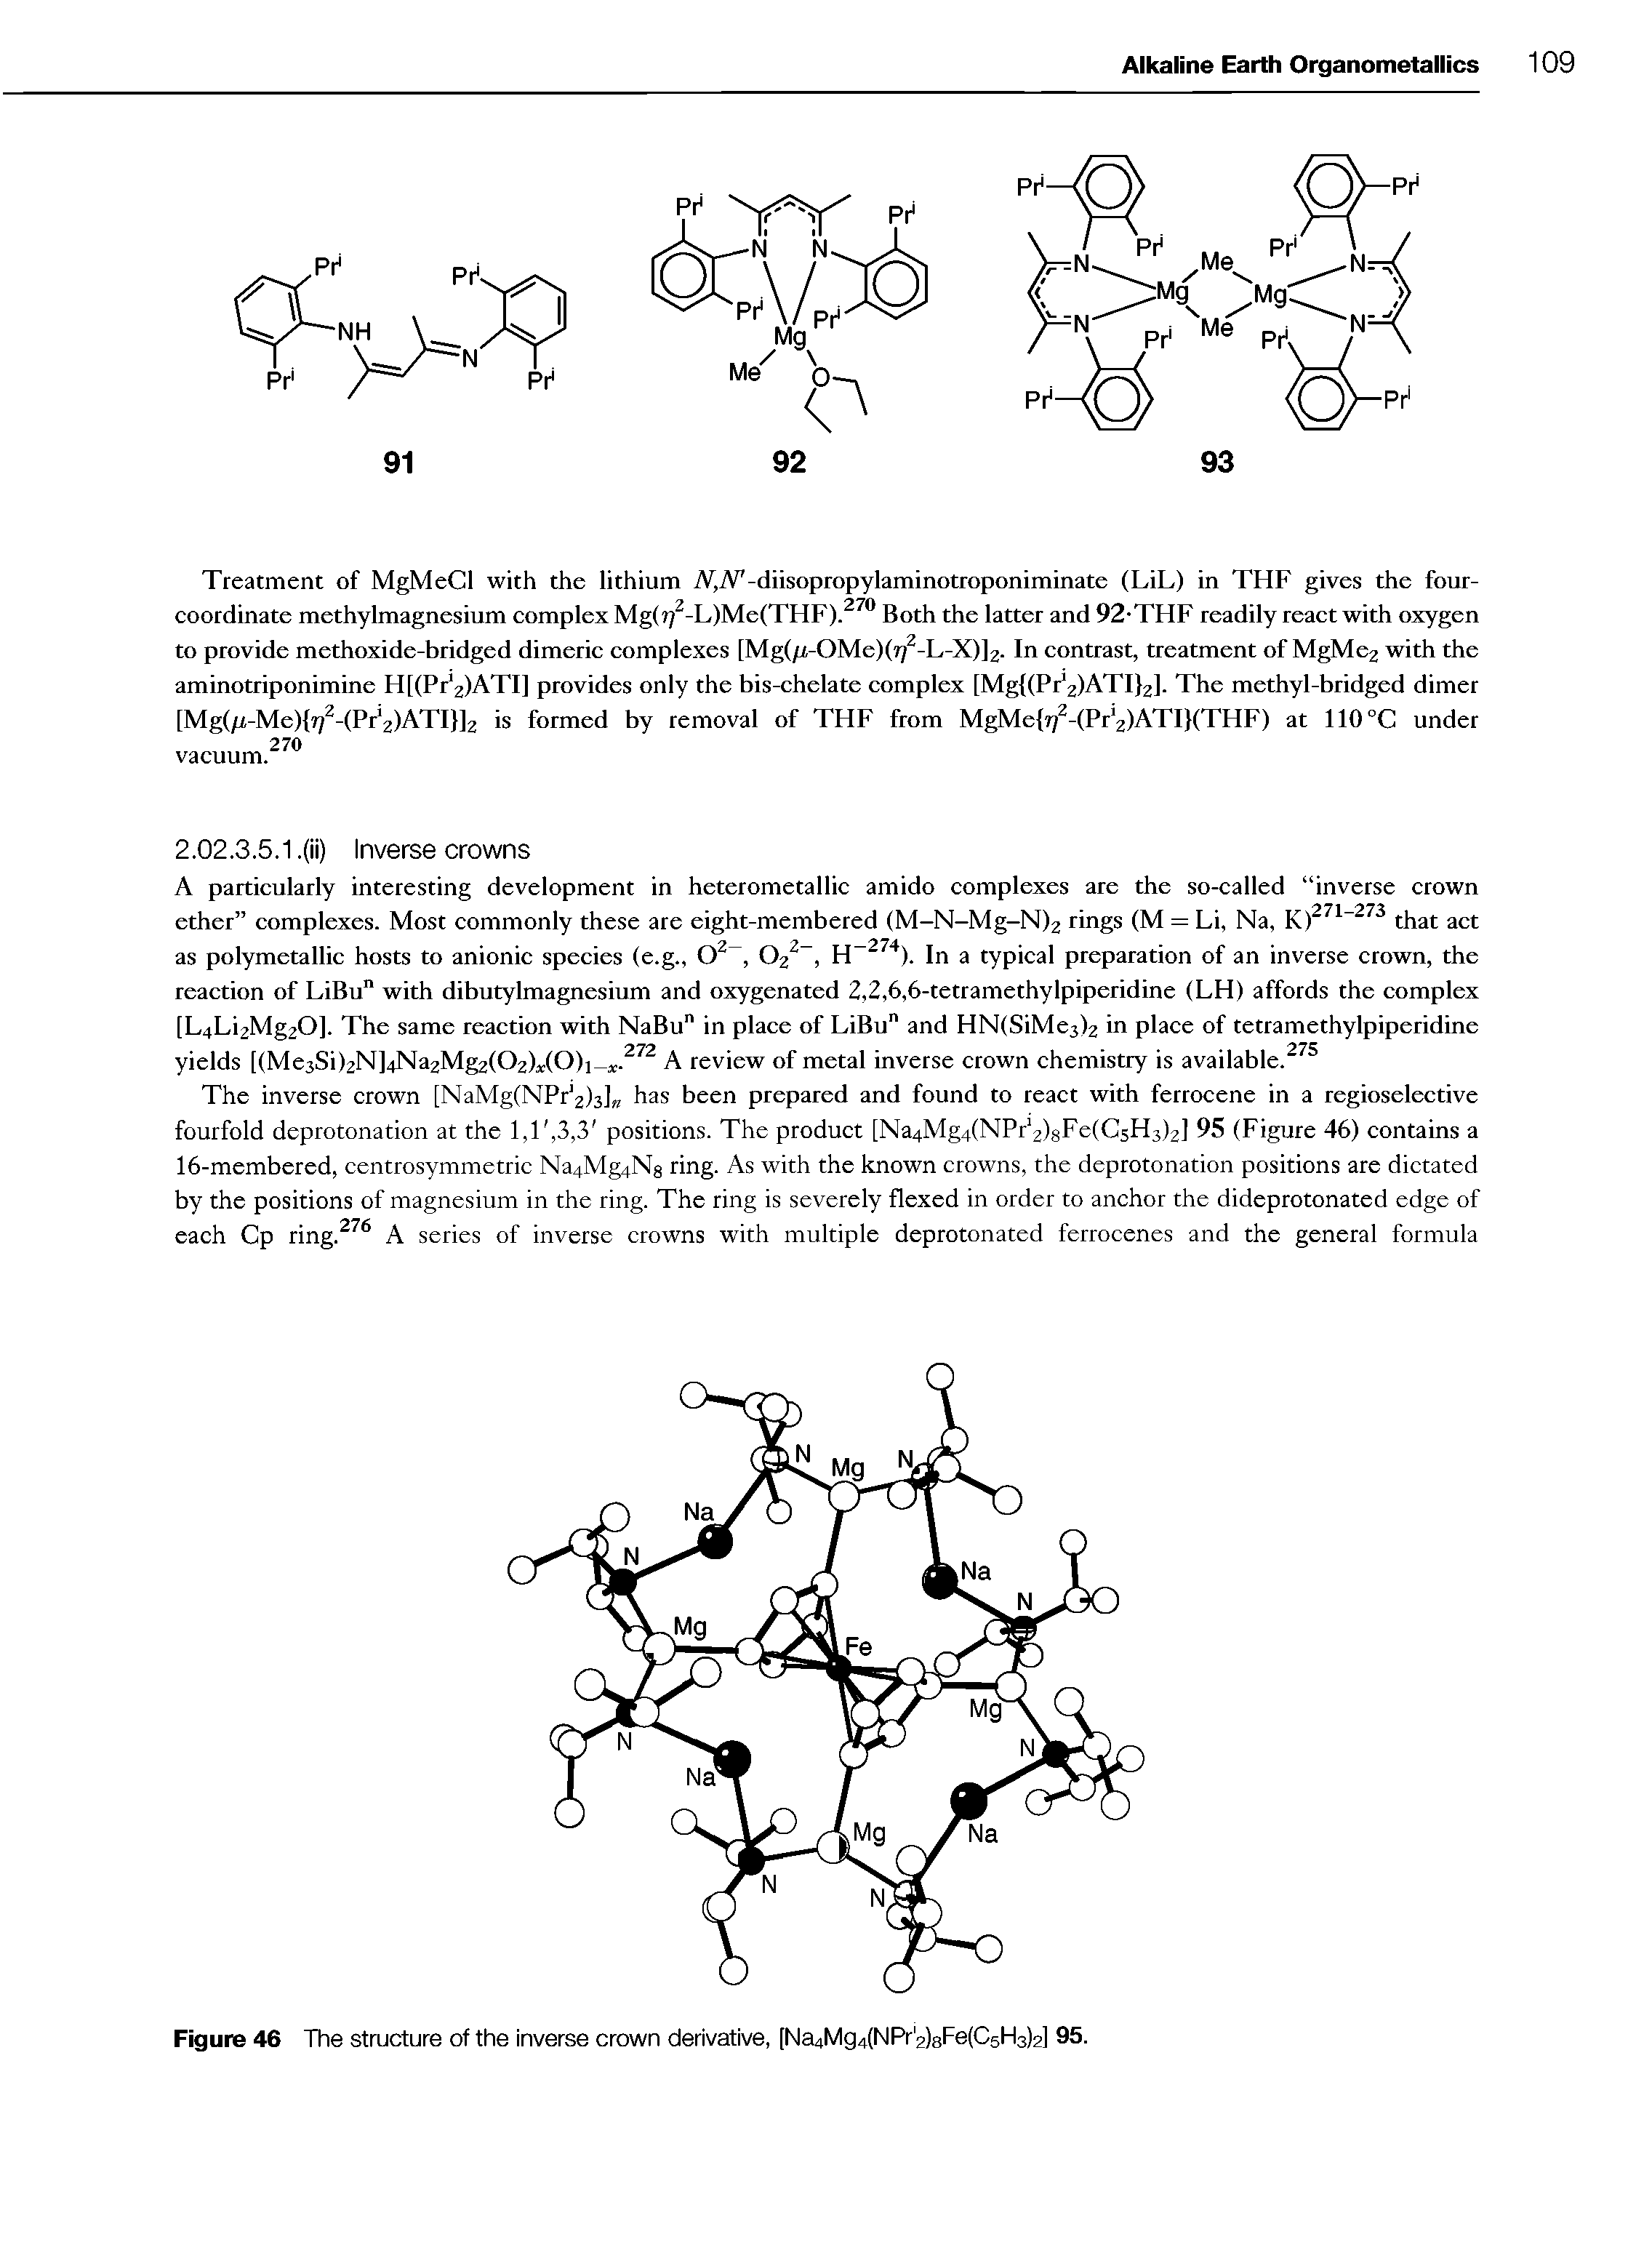 Figure 46 The structure of the inverse crown derivative, [Na4Mg4(NPr 2)8Fe(C5H3)2] 95.